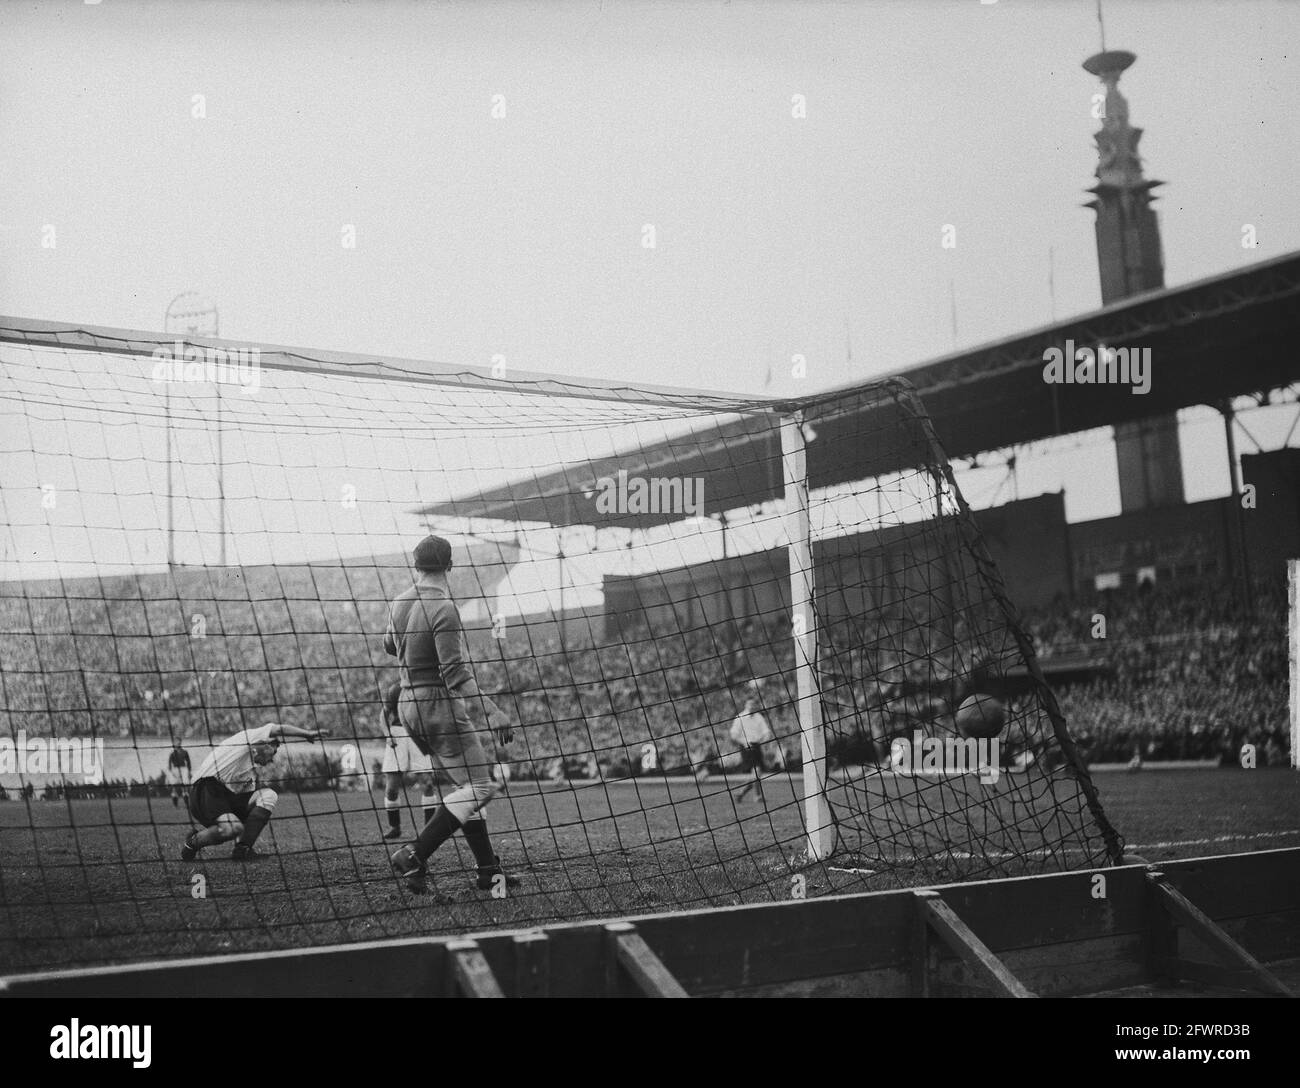 Netherlands-England 0-1 to England, 18 May 1949, sport, soccer, The Netherlands, 20th century press agency photo, news to remember, documentary, historic photography 1945-1990, visual stories, human history of the Twentieth Century, capturing moments in time Stock Photo